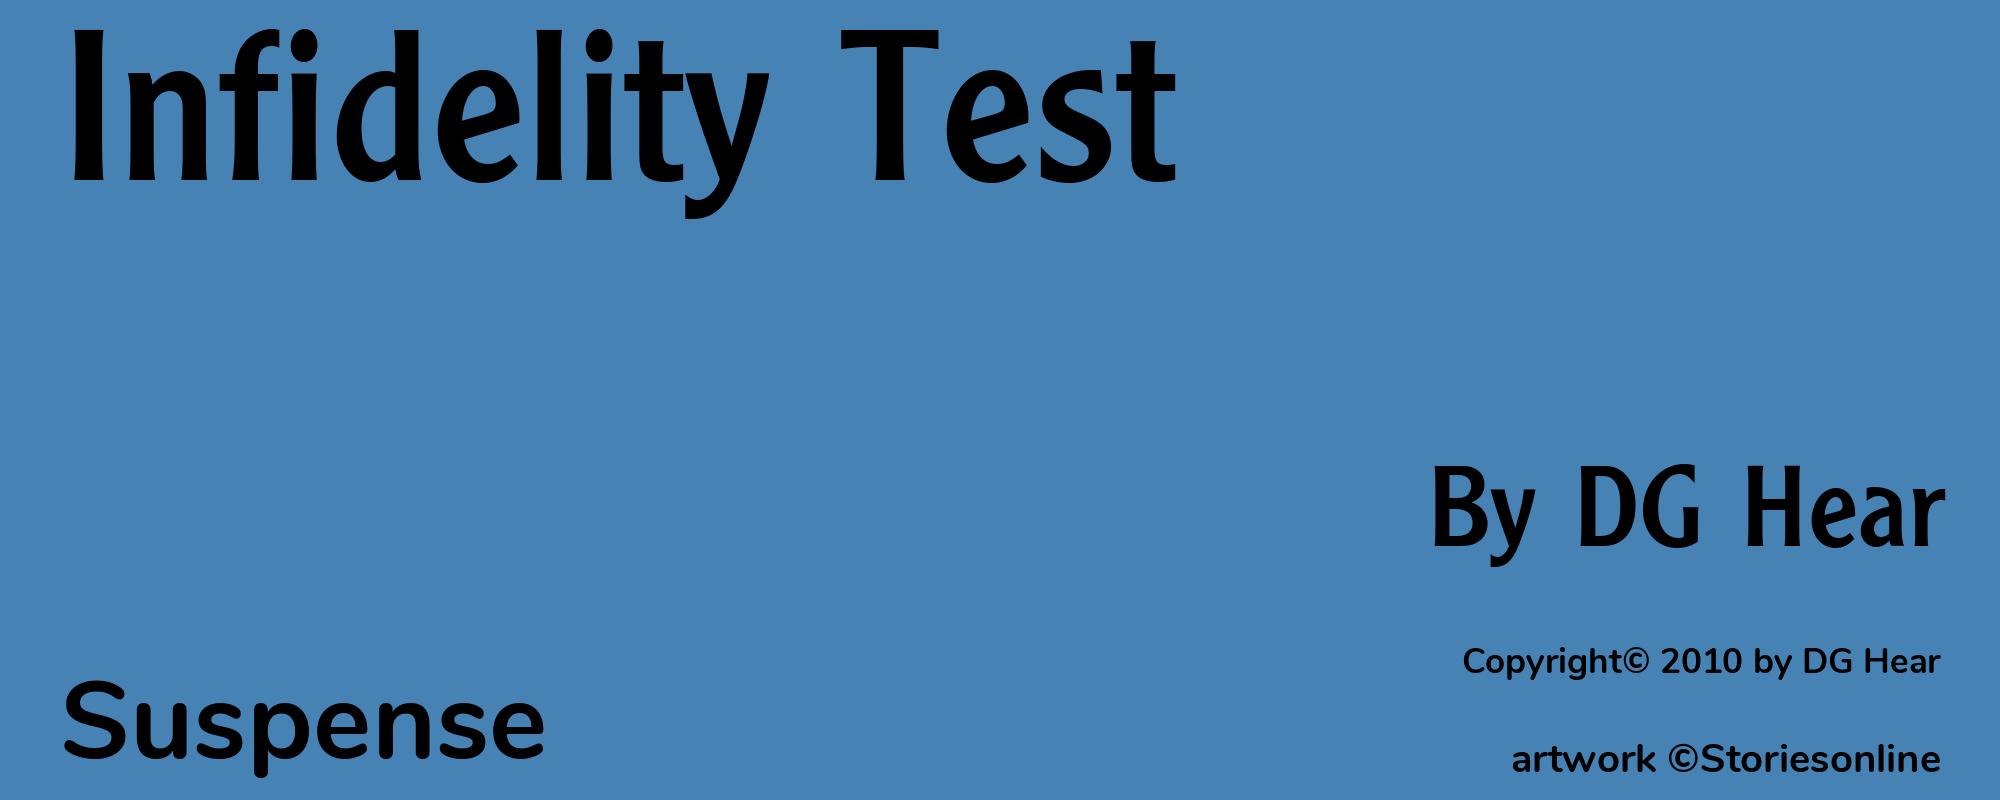 Infidelity Test - Cover